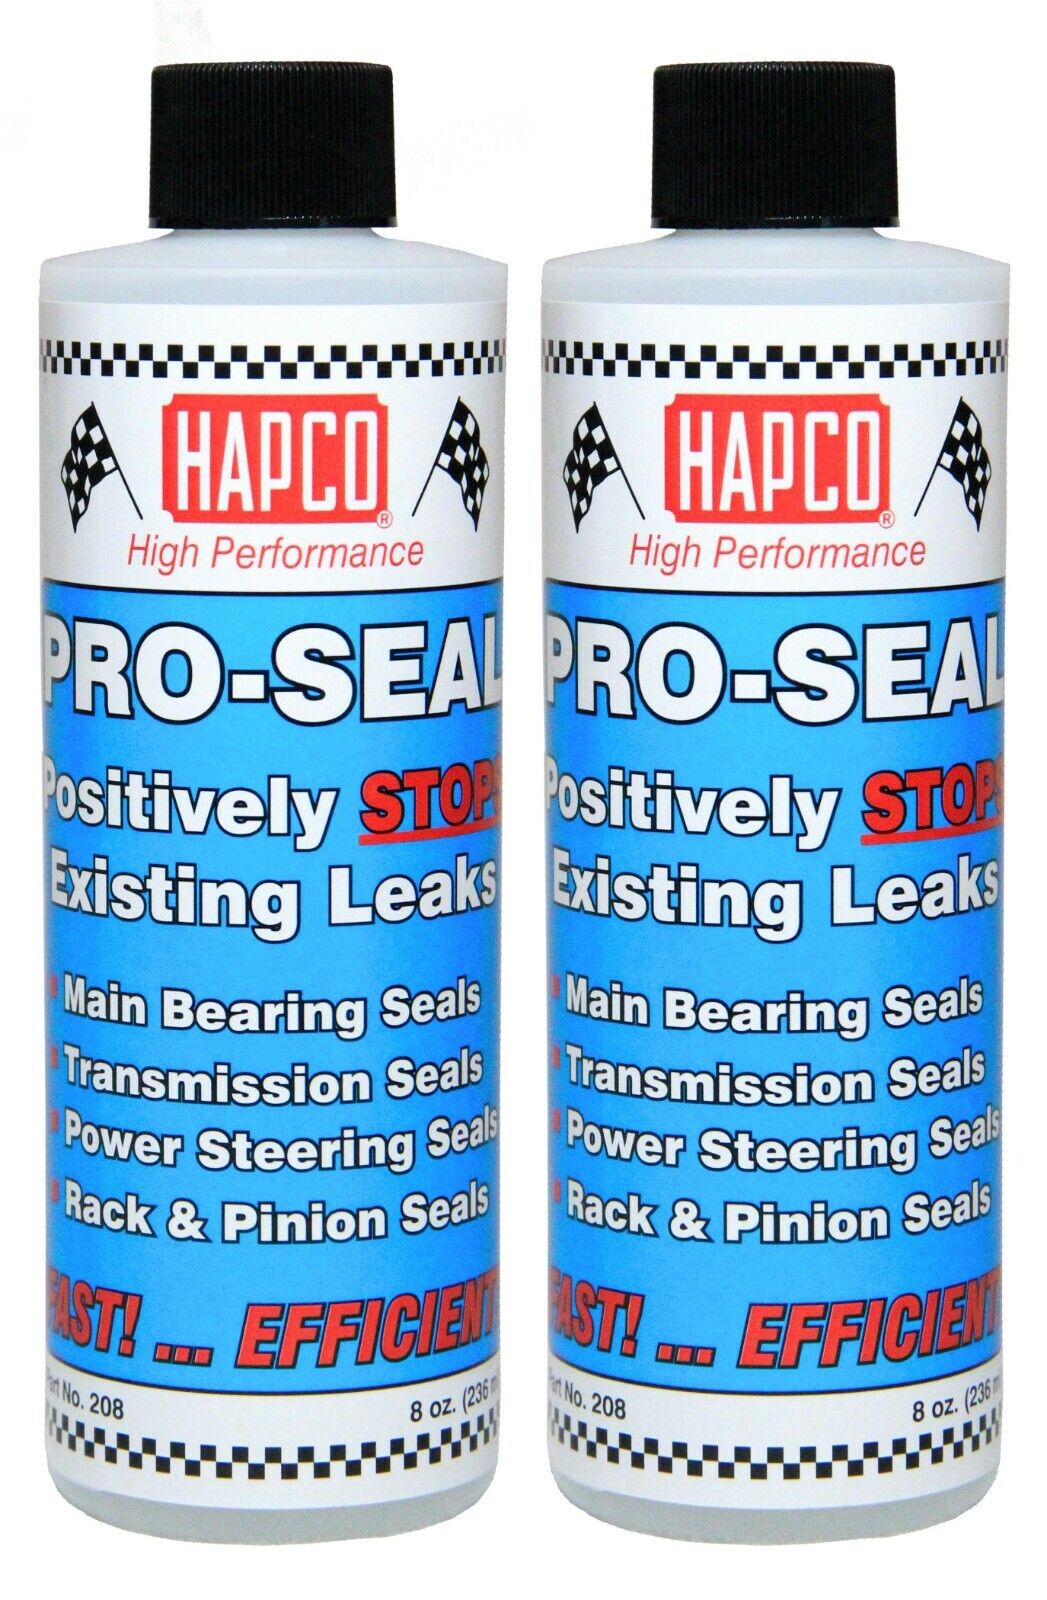  Pro-Seal  -  GUARANTEED TO STOP OIL LEAKS FAST - EASY TO USE  -  2 PACK